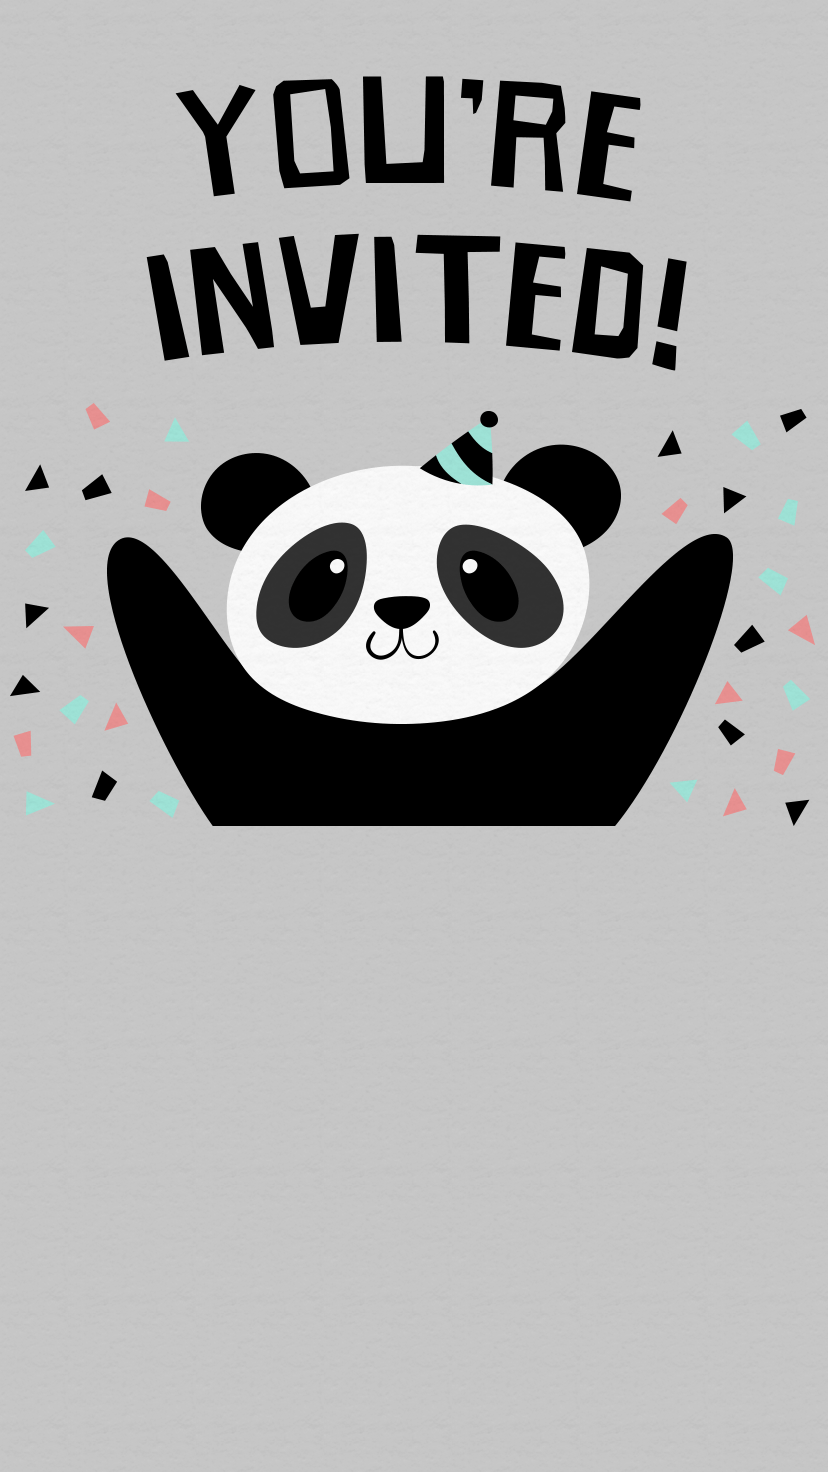 panda bear animated evite invitation birthday party invitations themed funny pictures with captions medium